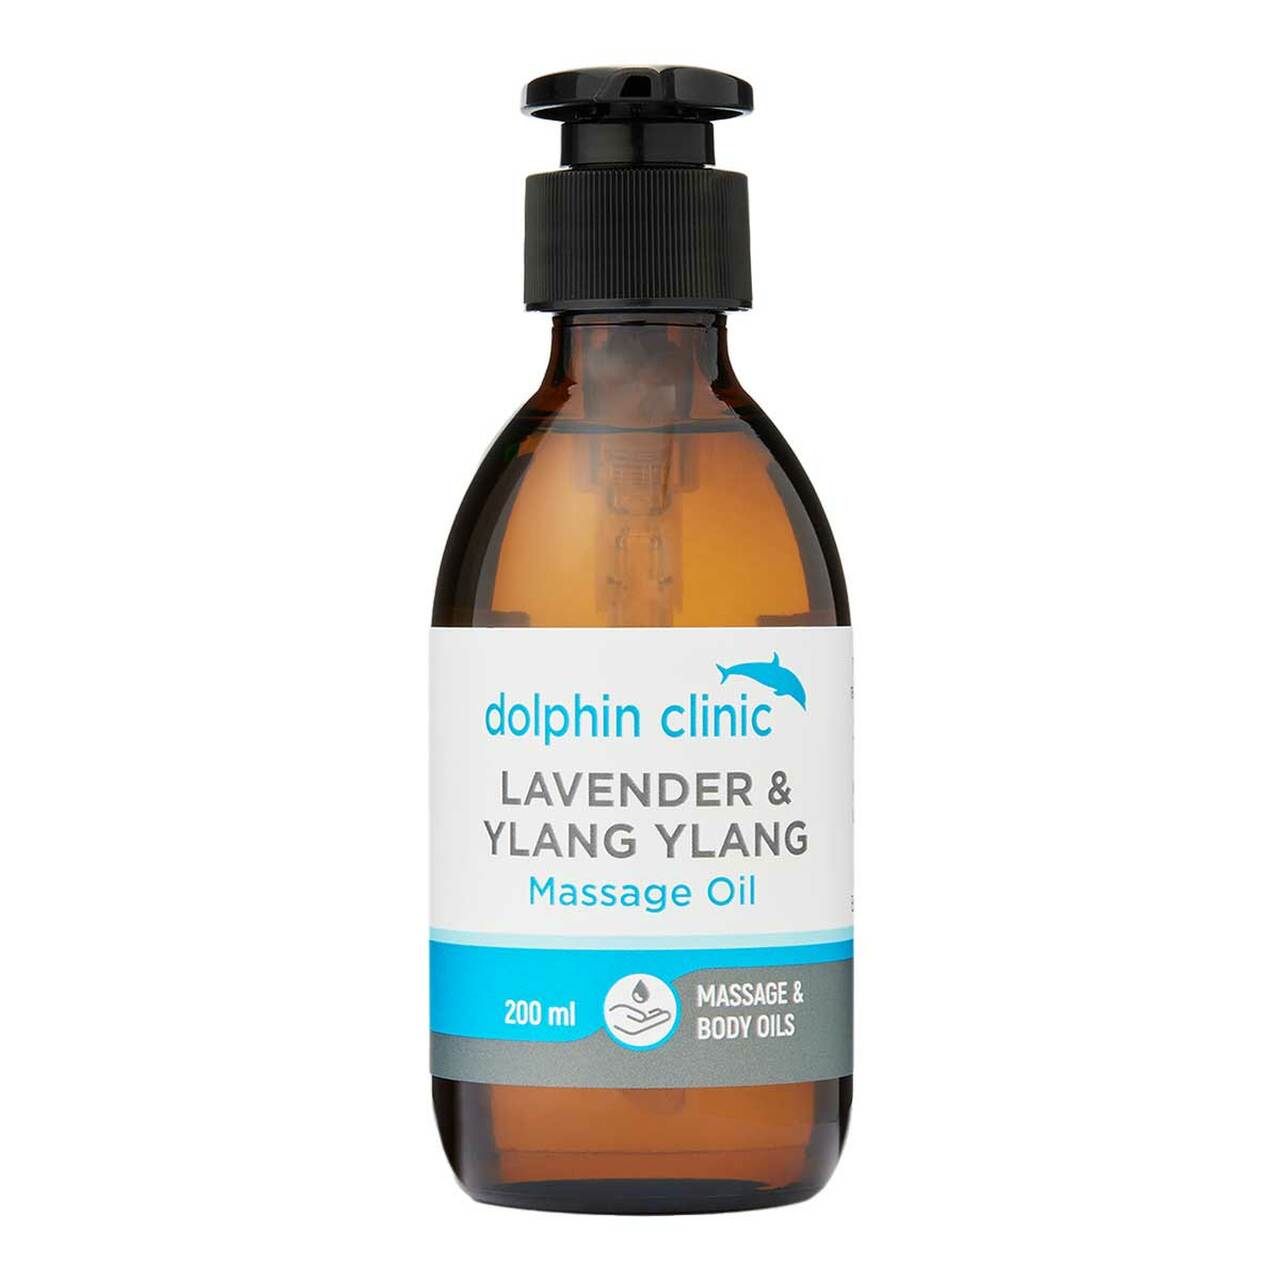 Dolphin Clinic Lavender & Ylang Ylang Massage Oil 200ml